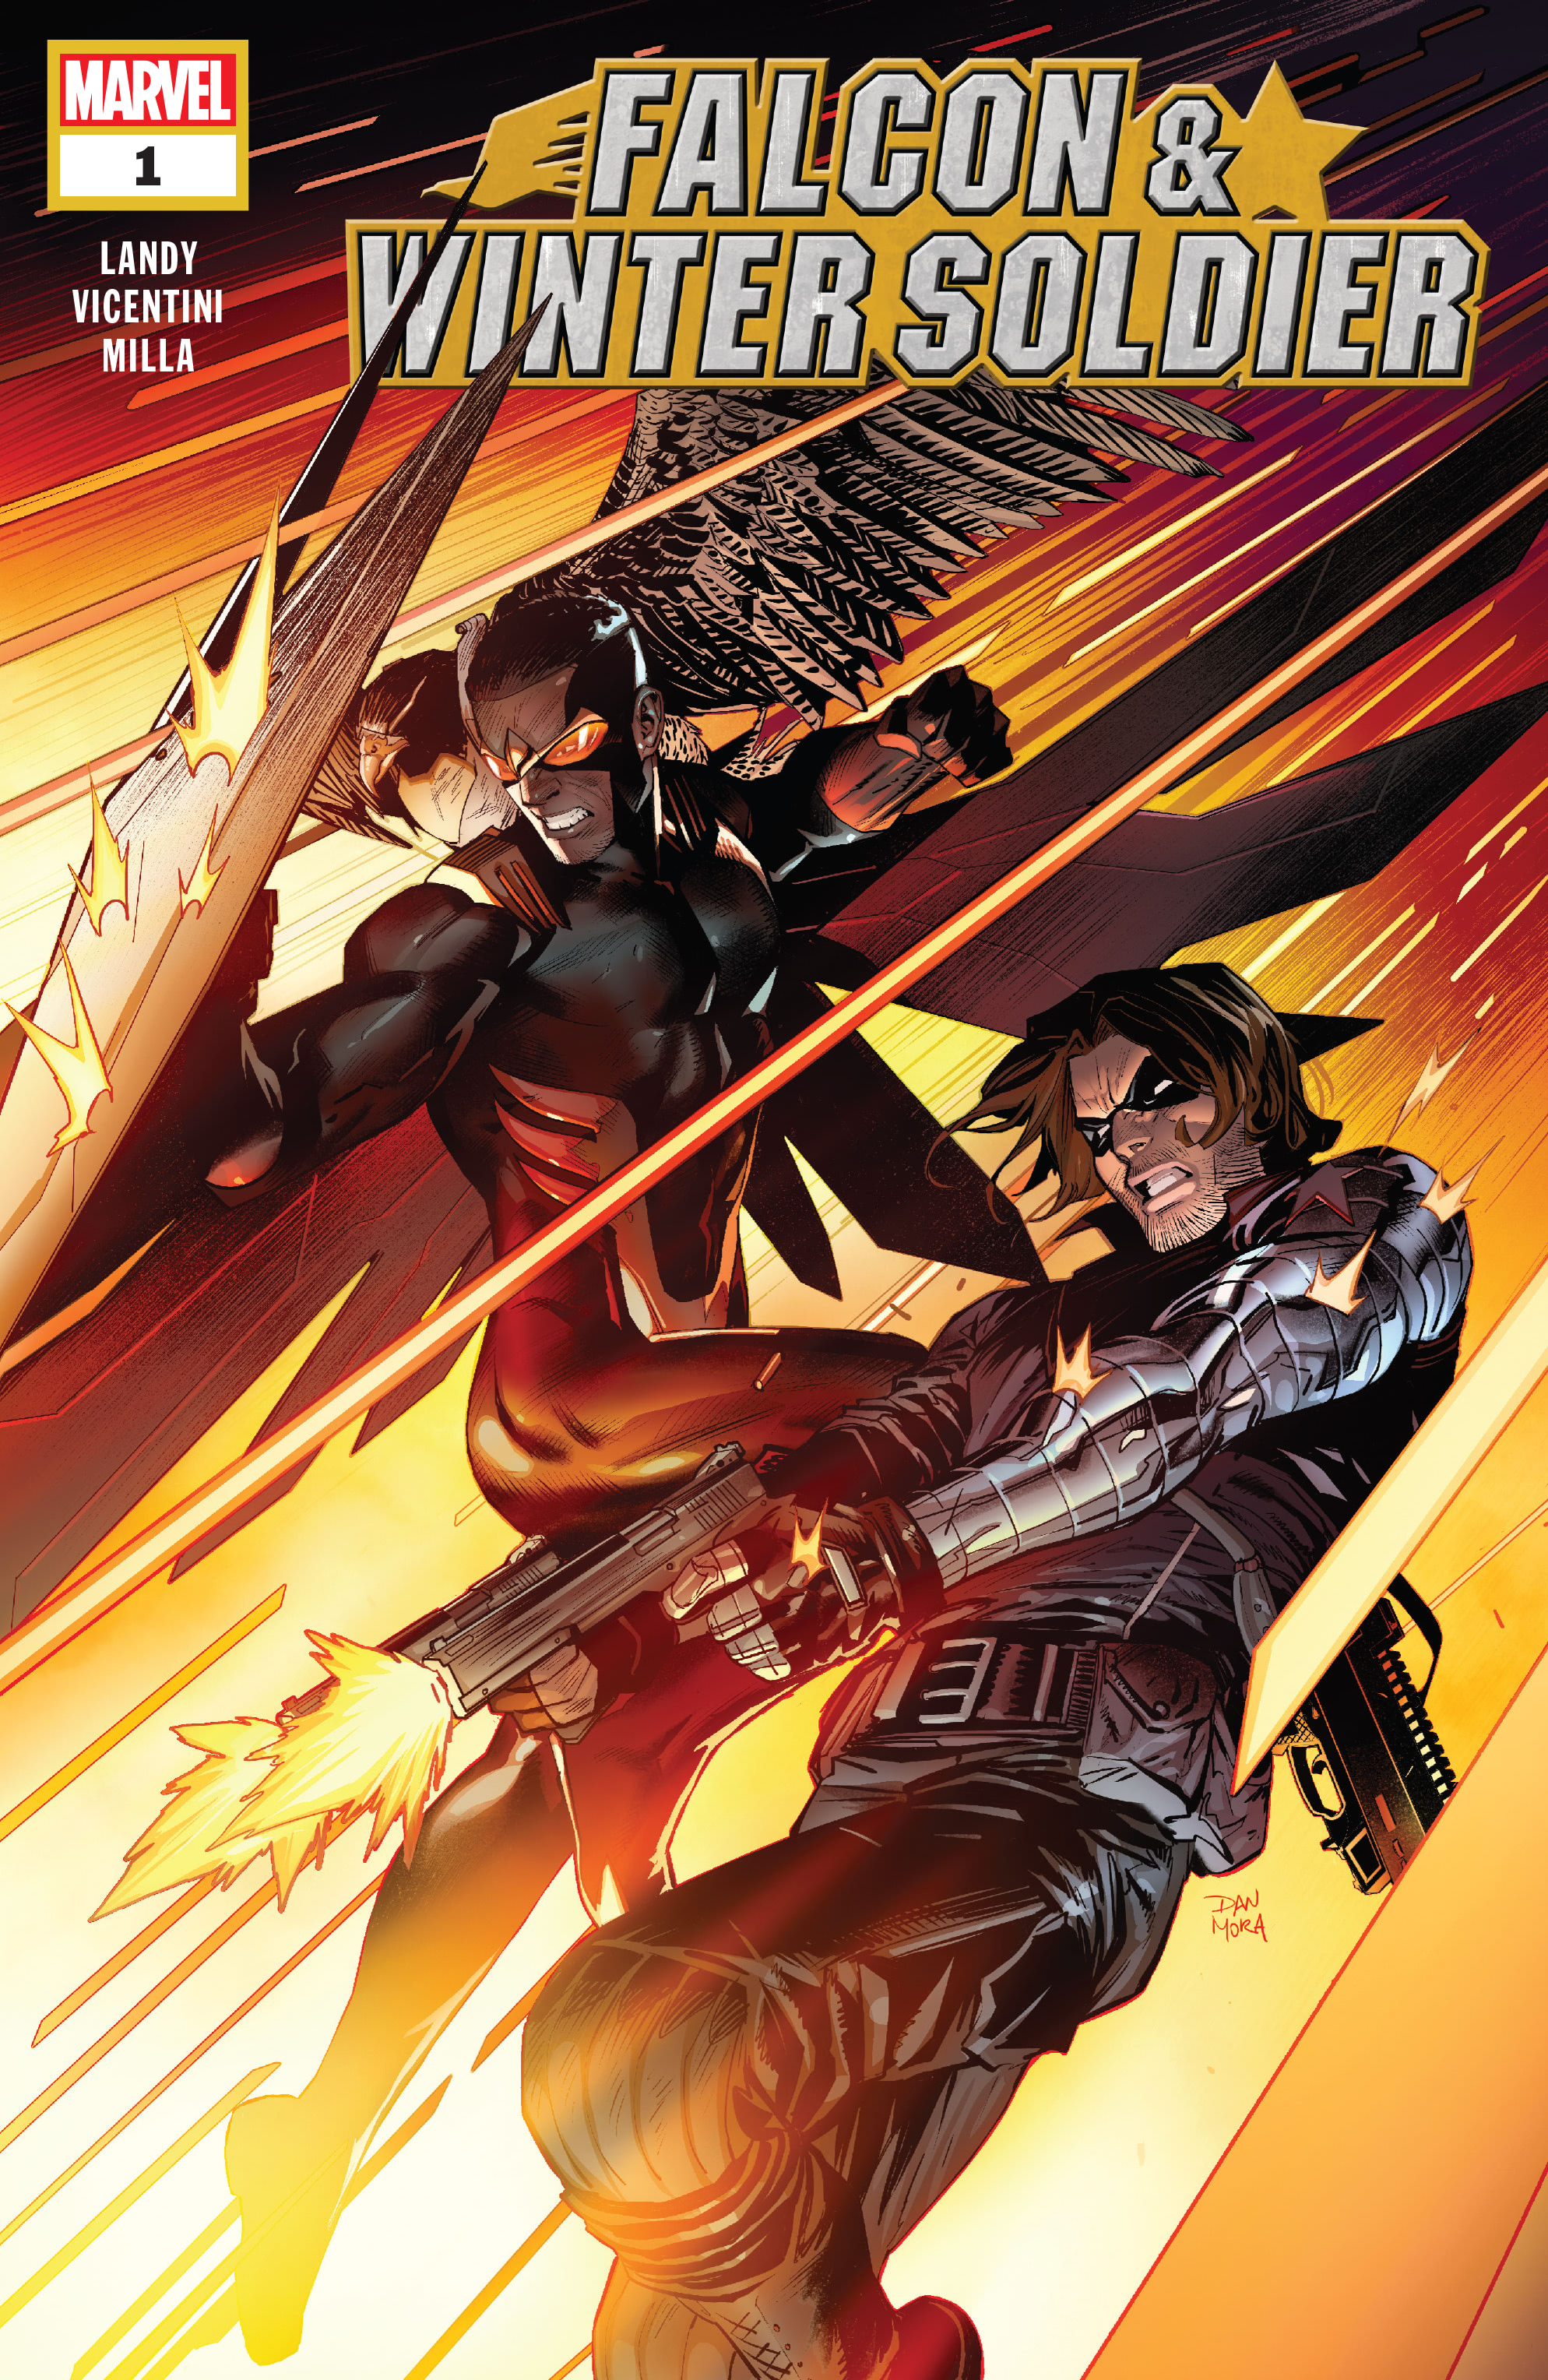 Read online Falcon & Winter Soldier comic -  Issue #1 - 1